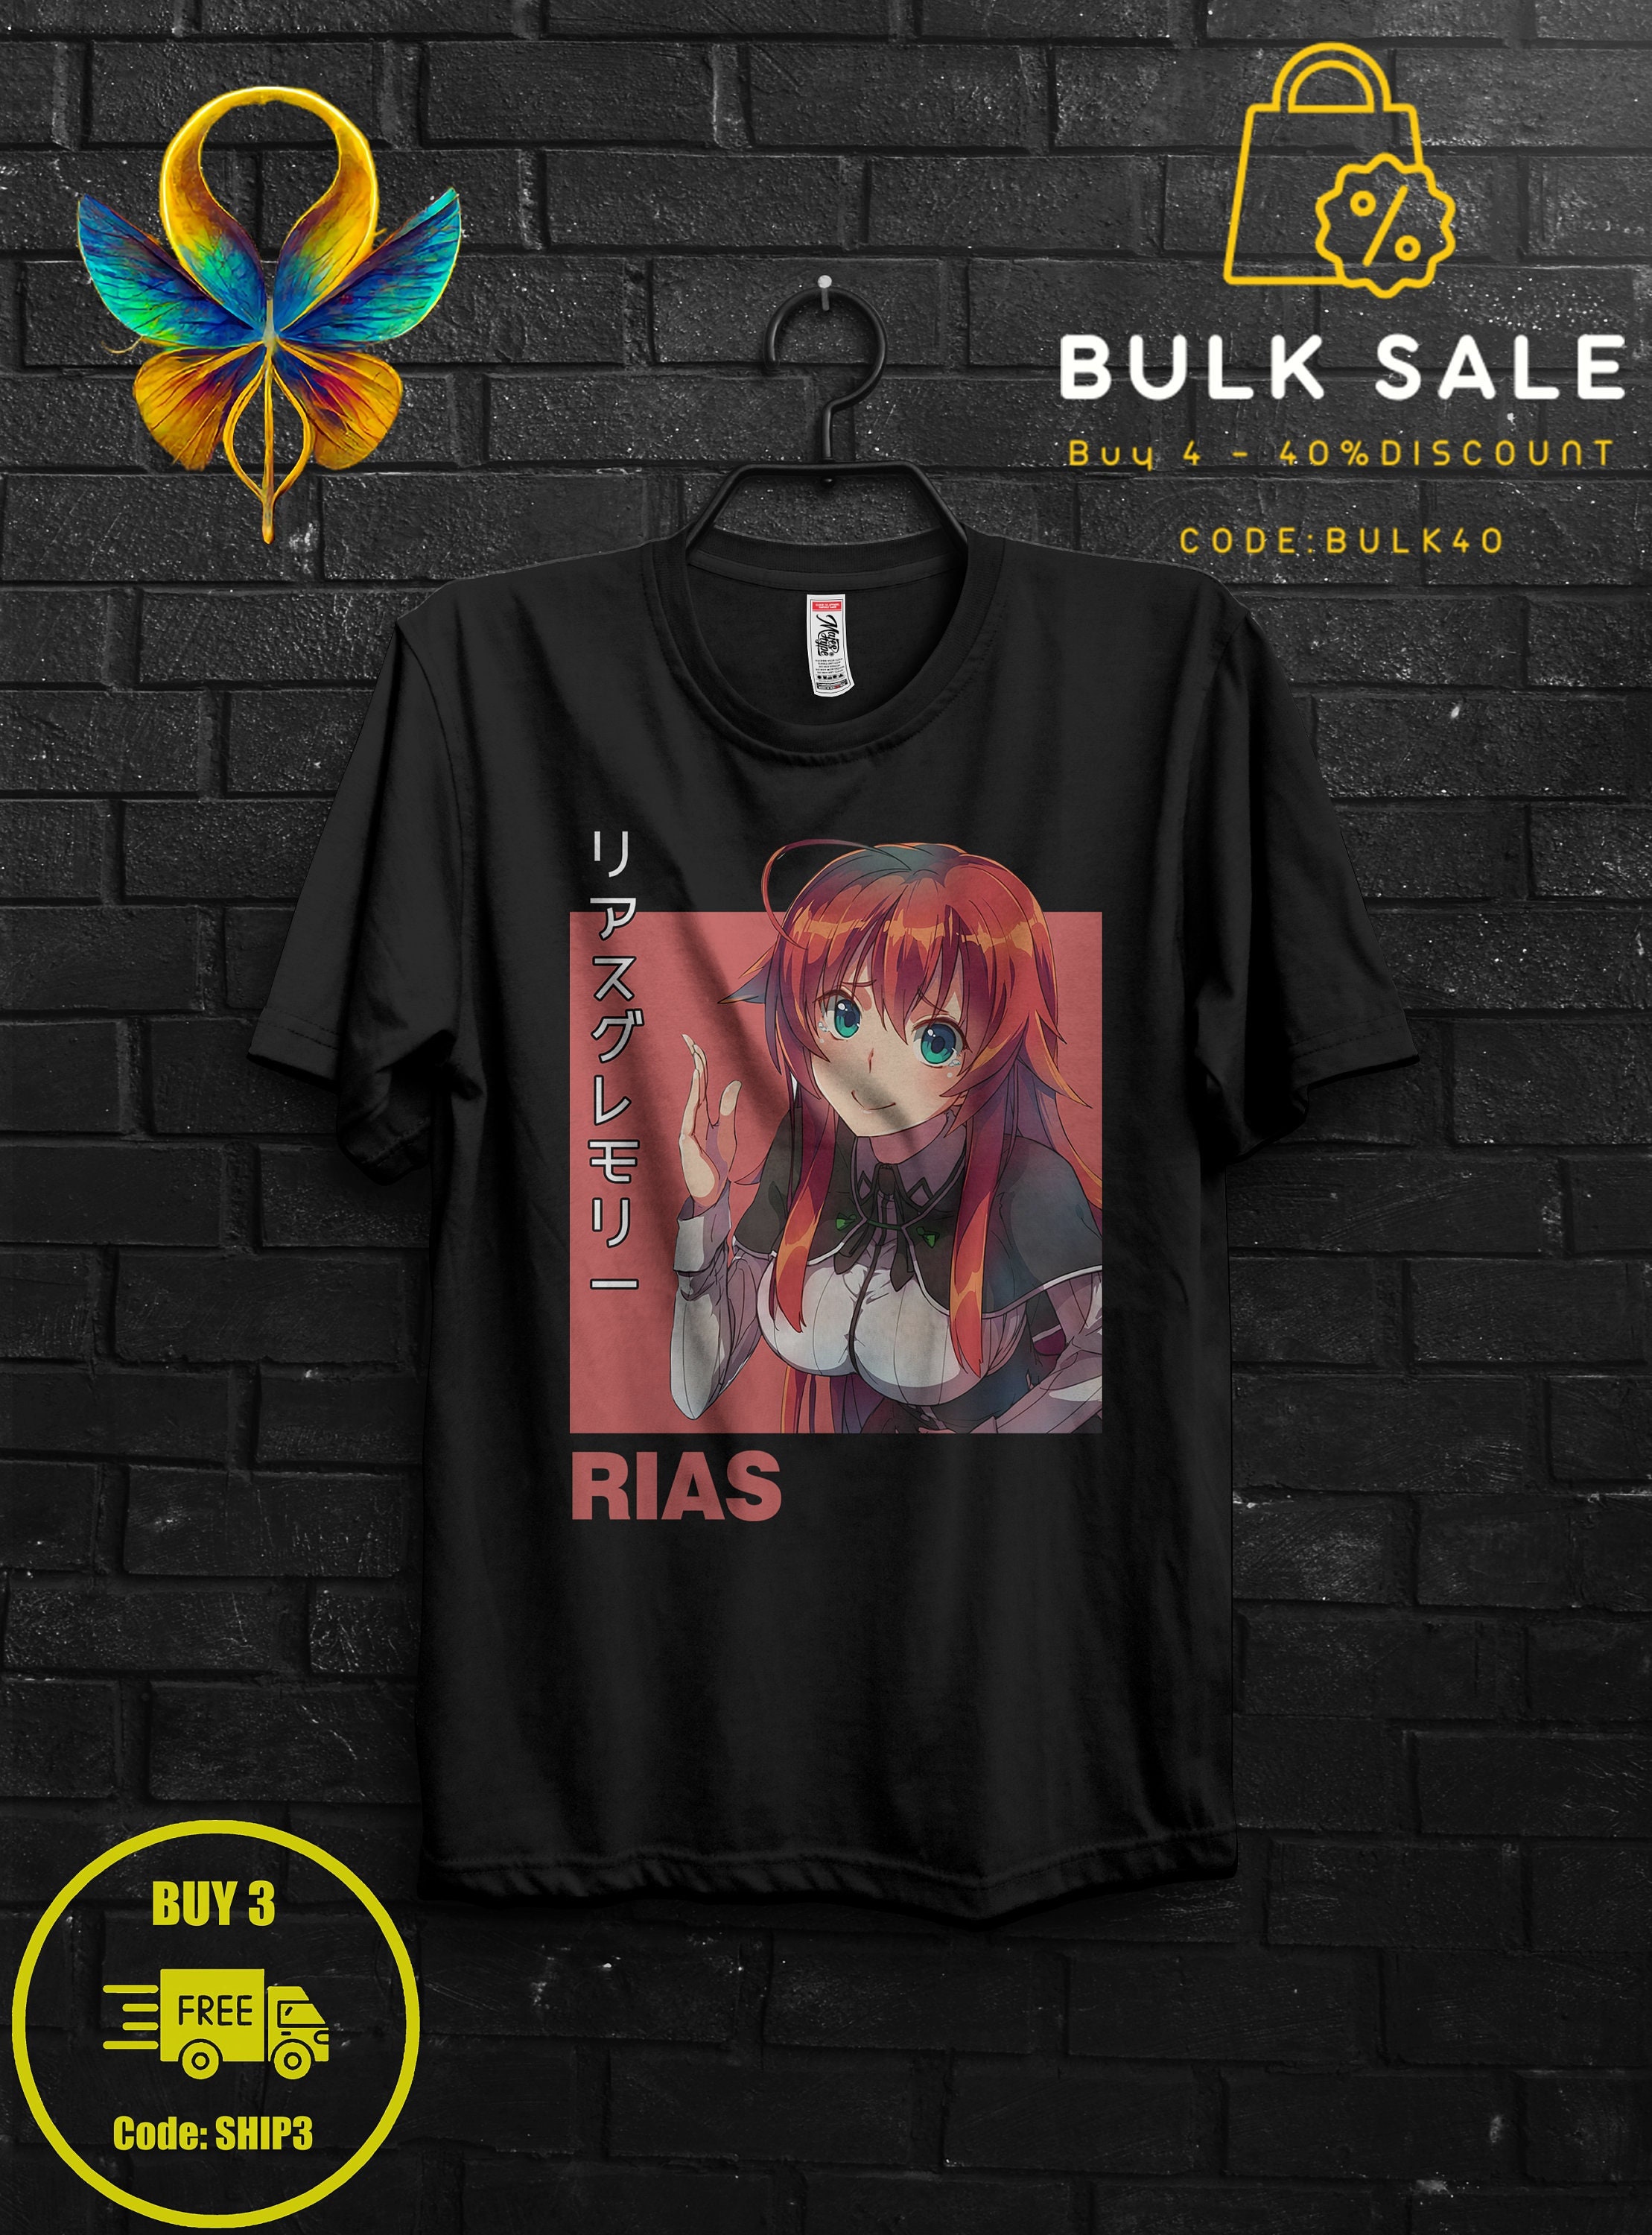 Rias Gremory Shirt Anime Gift Cosplay For Girl,Rossweisse Tshirt For Sitri,Xenovia Appareal For Her,Issei Hyoudou Sweat,High School DxD Tee 1600245491